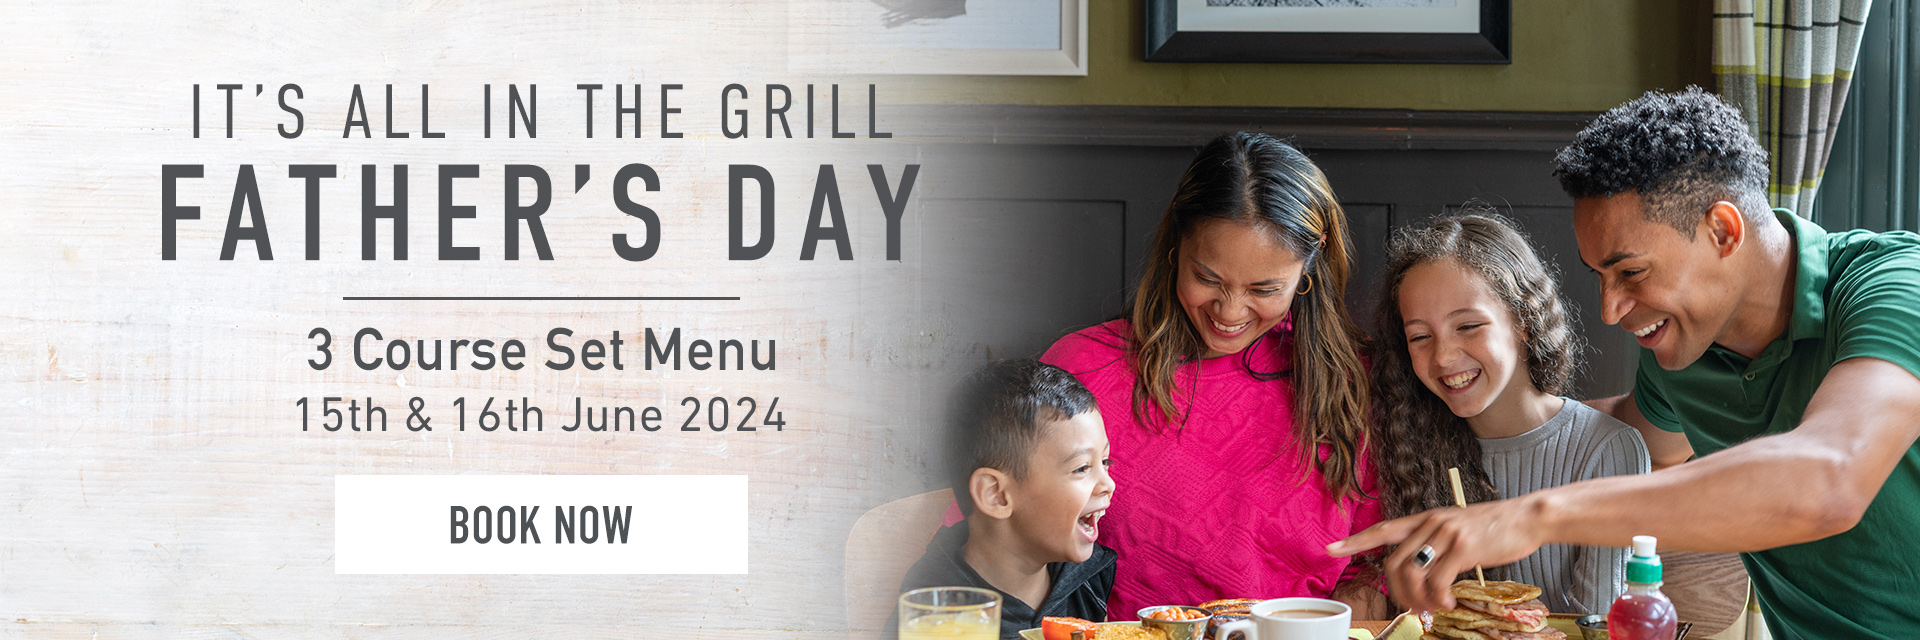 Father’s Day at Harvester Gravesend